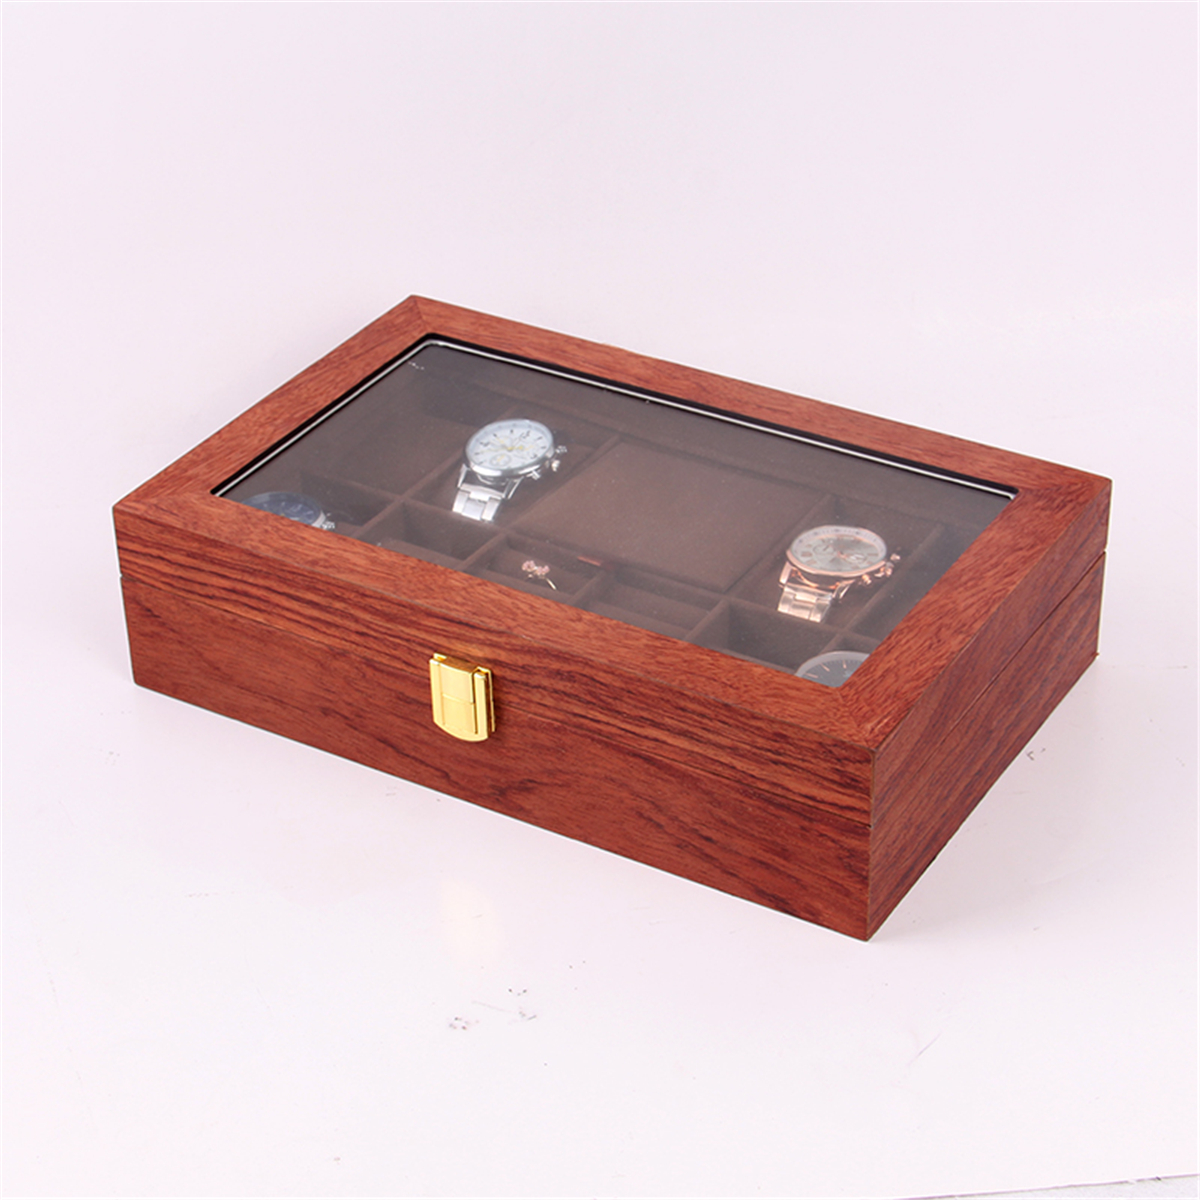 Woden-Watch-Boxes-Necklace-Jewelry-Watch-Display-Box-1658187-1